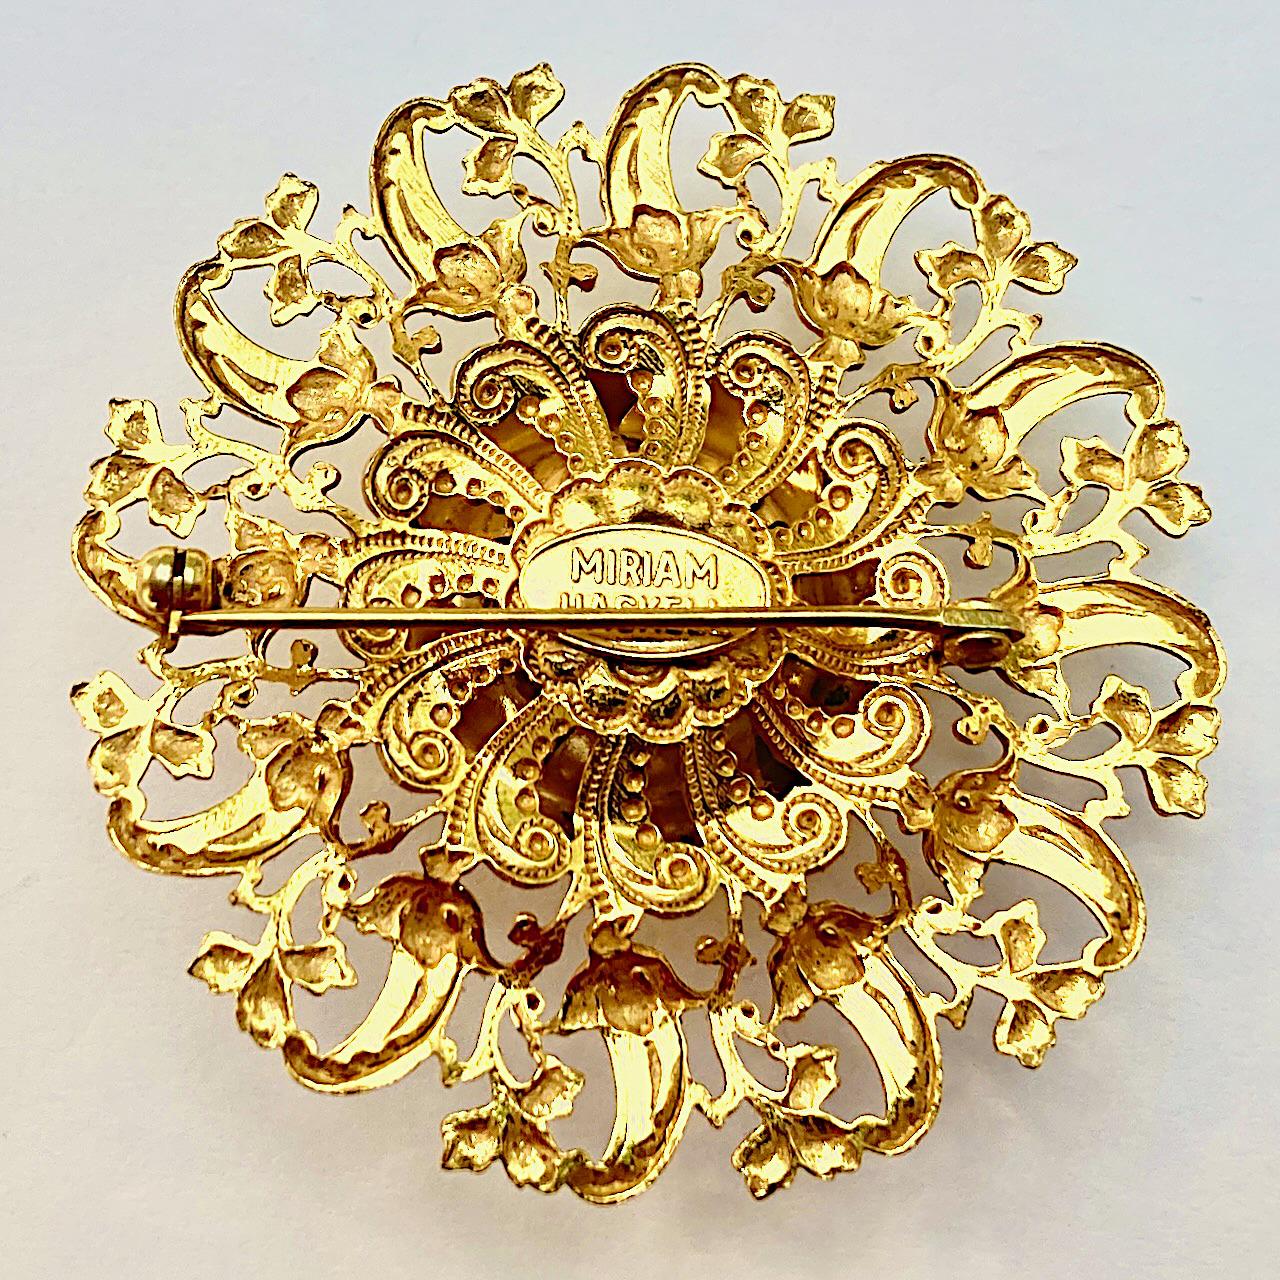 Miriam Haskell beautiful Russian gold plated brooch, with a lovely ornate flower and leaf design. Measuring diameter 5.2 cm / 2 inches. The brooch is in very good condition.

This is a wonderful intricate brooch with the Haskell Russian gold patina.